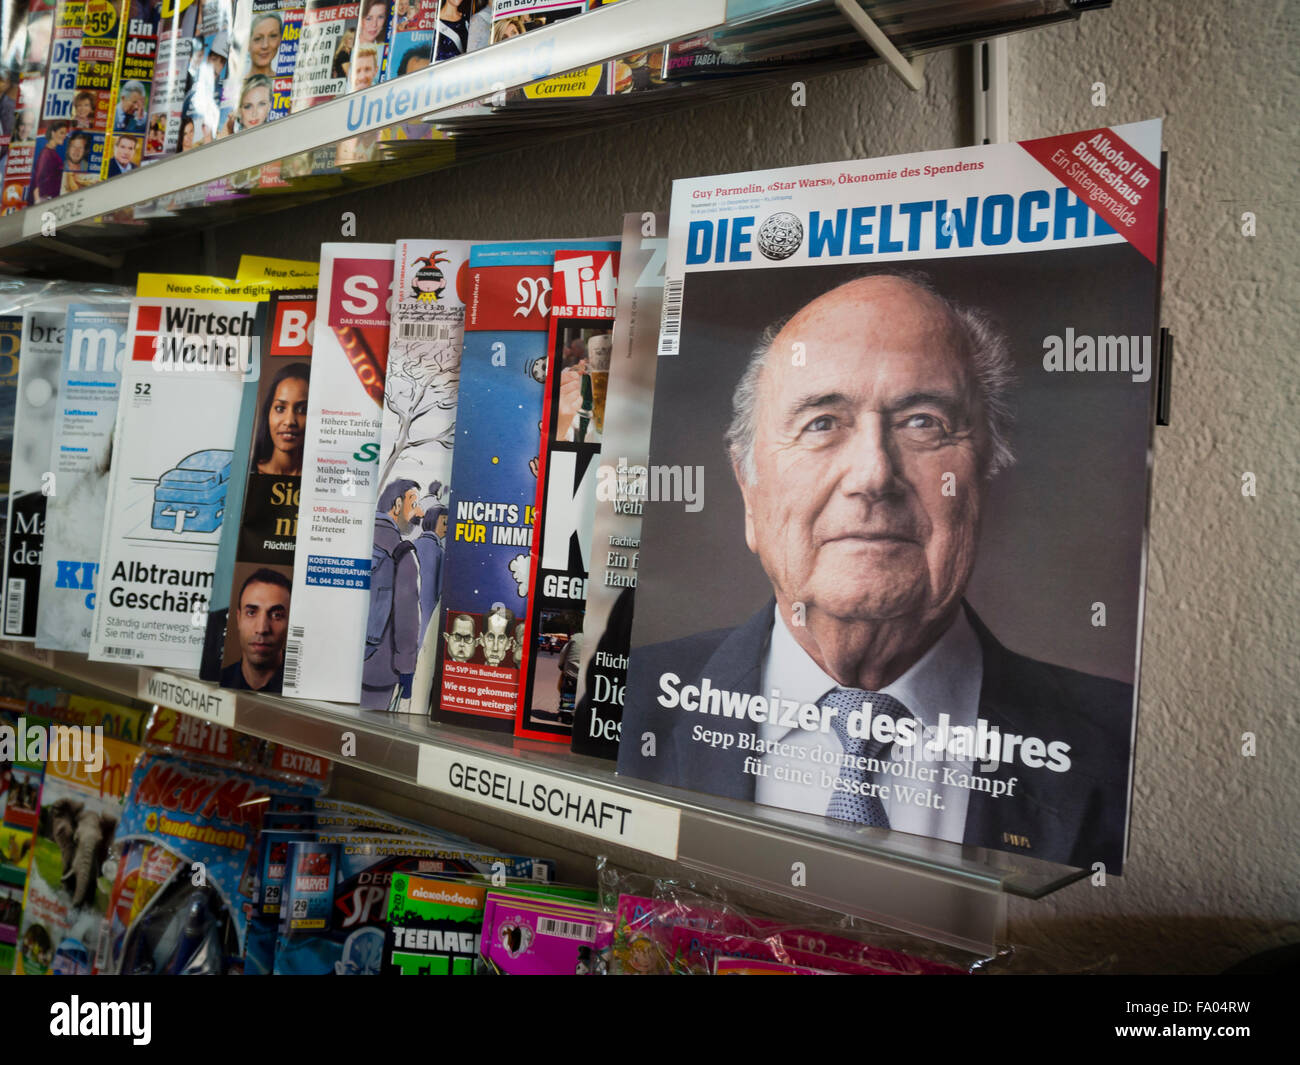 The portrait of suspended FIFA boss Sepp Blatter is featured on the cover of Swiss 'Weltwoche' magazine that is put up for sale on the shelf of a Zurich newsstand. The conservative weekly magazine named Blatter 'Swiss person of the year' for his 'impressive achievements'. Stock Photo